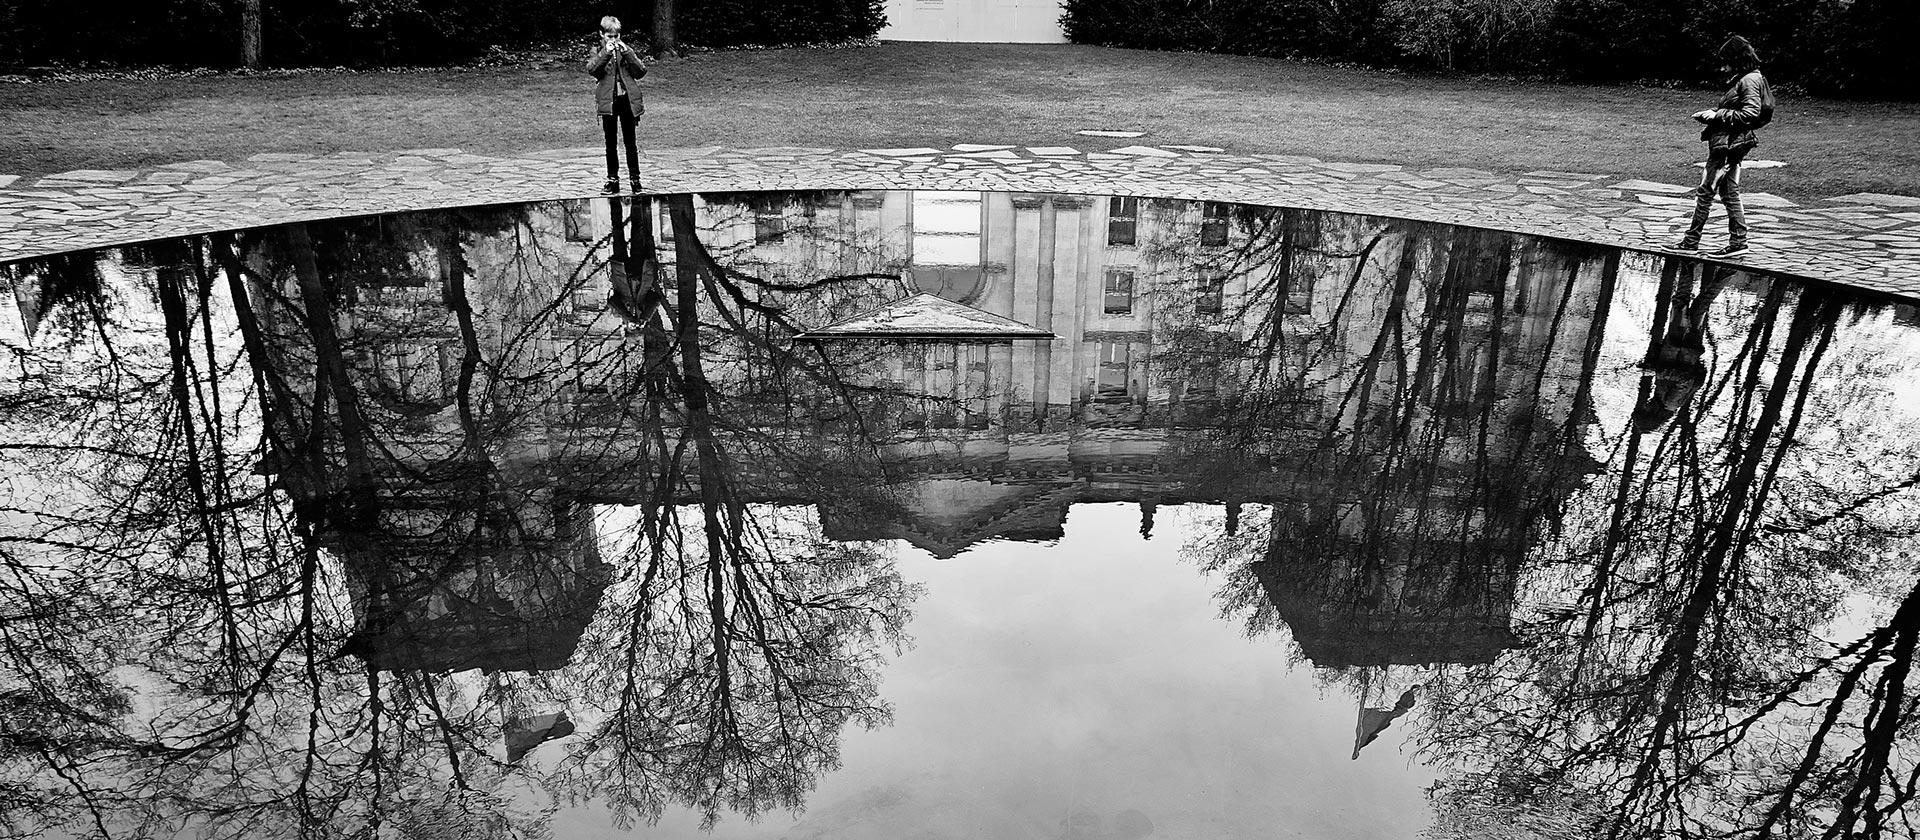 A building is reflected in the water, black and white photo.